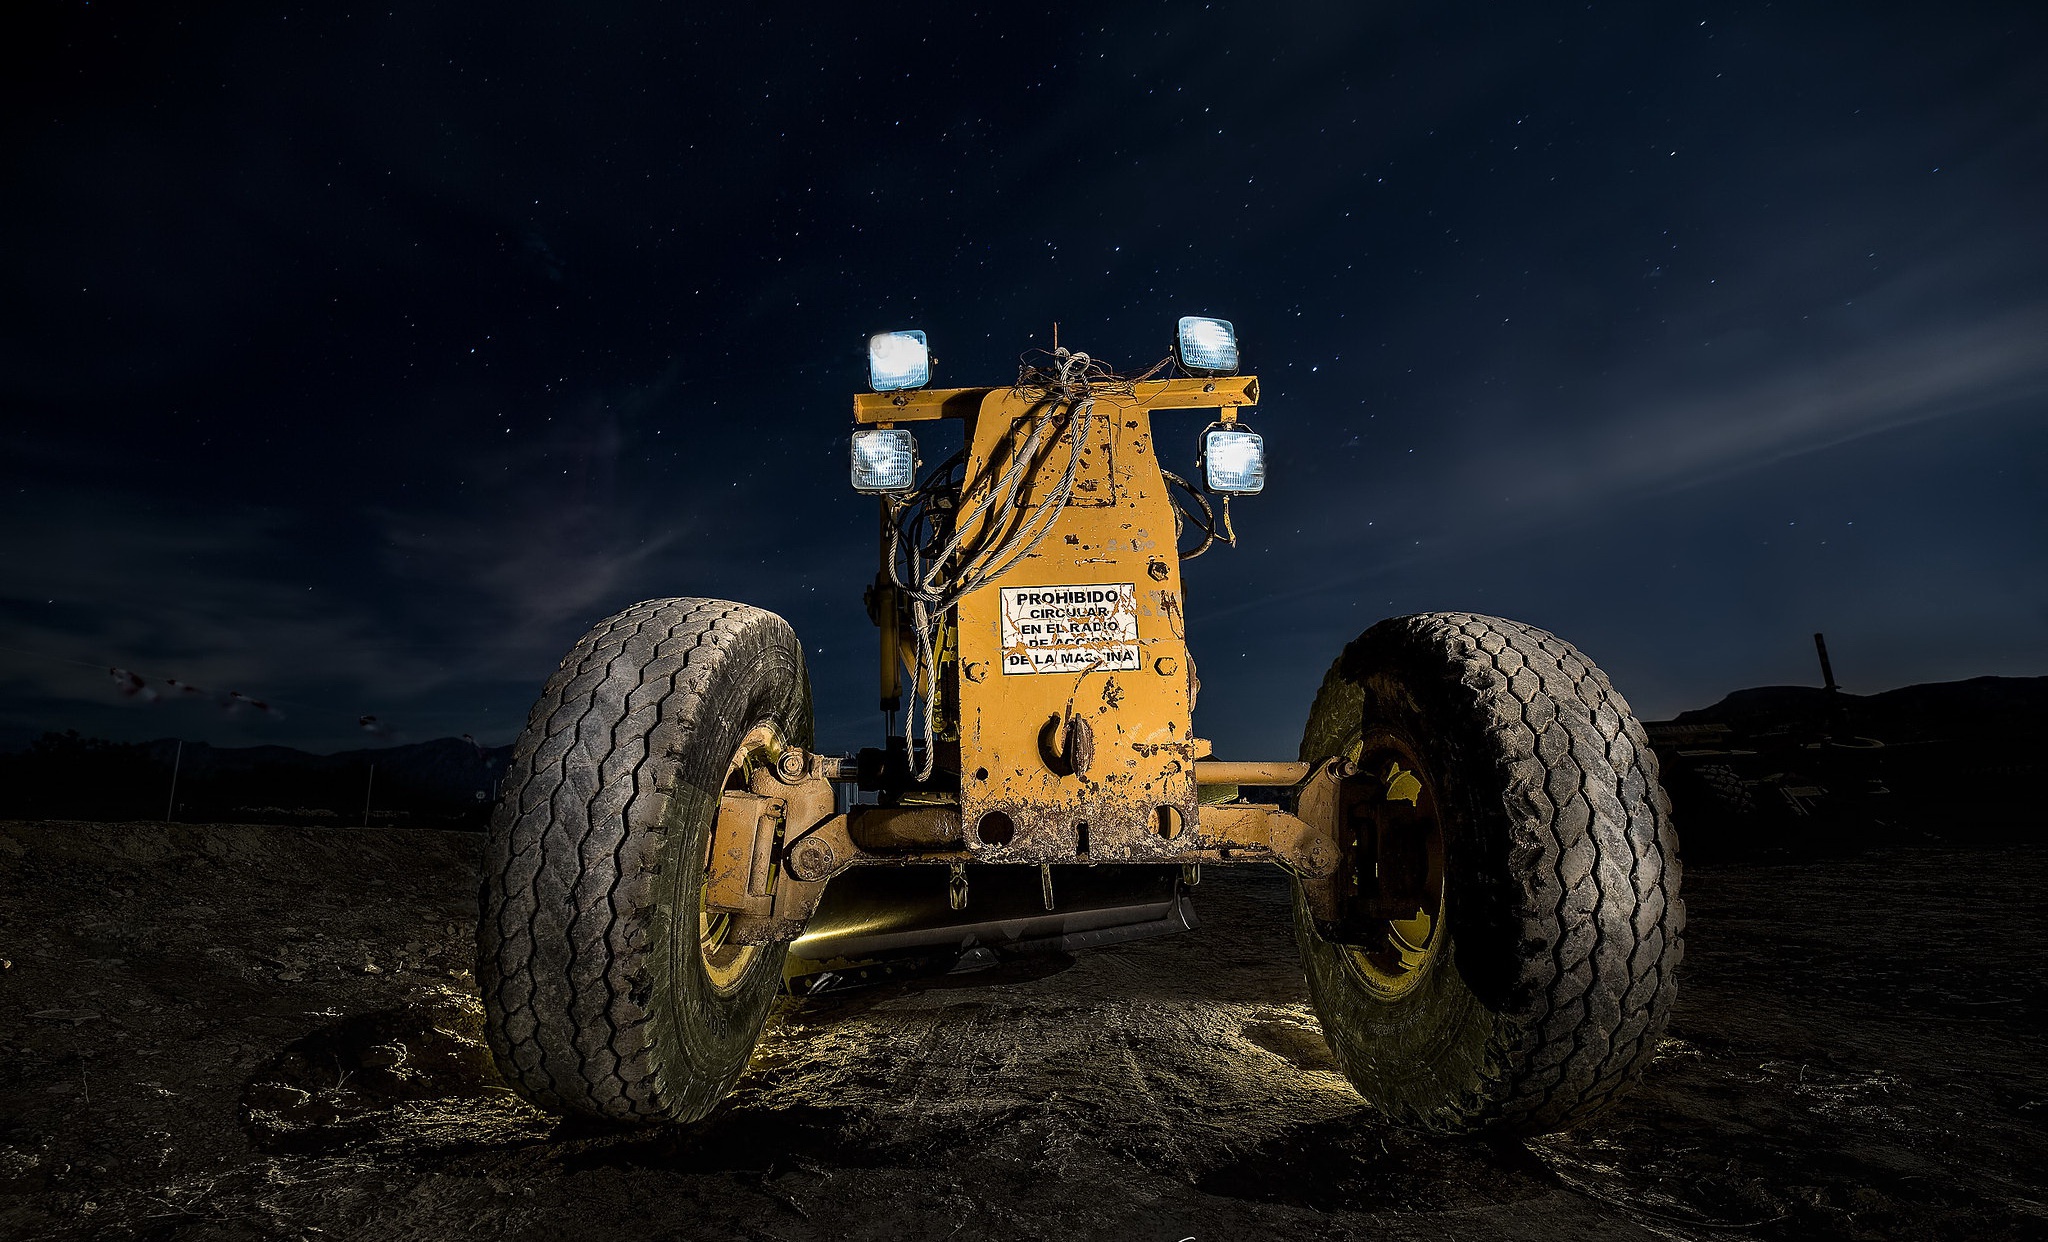 General 2048x1242 vehicle night tractors frontal view